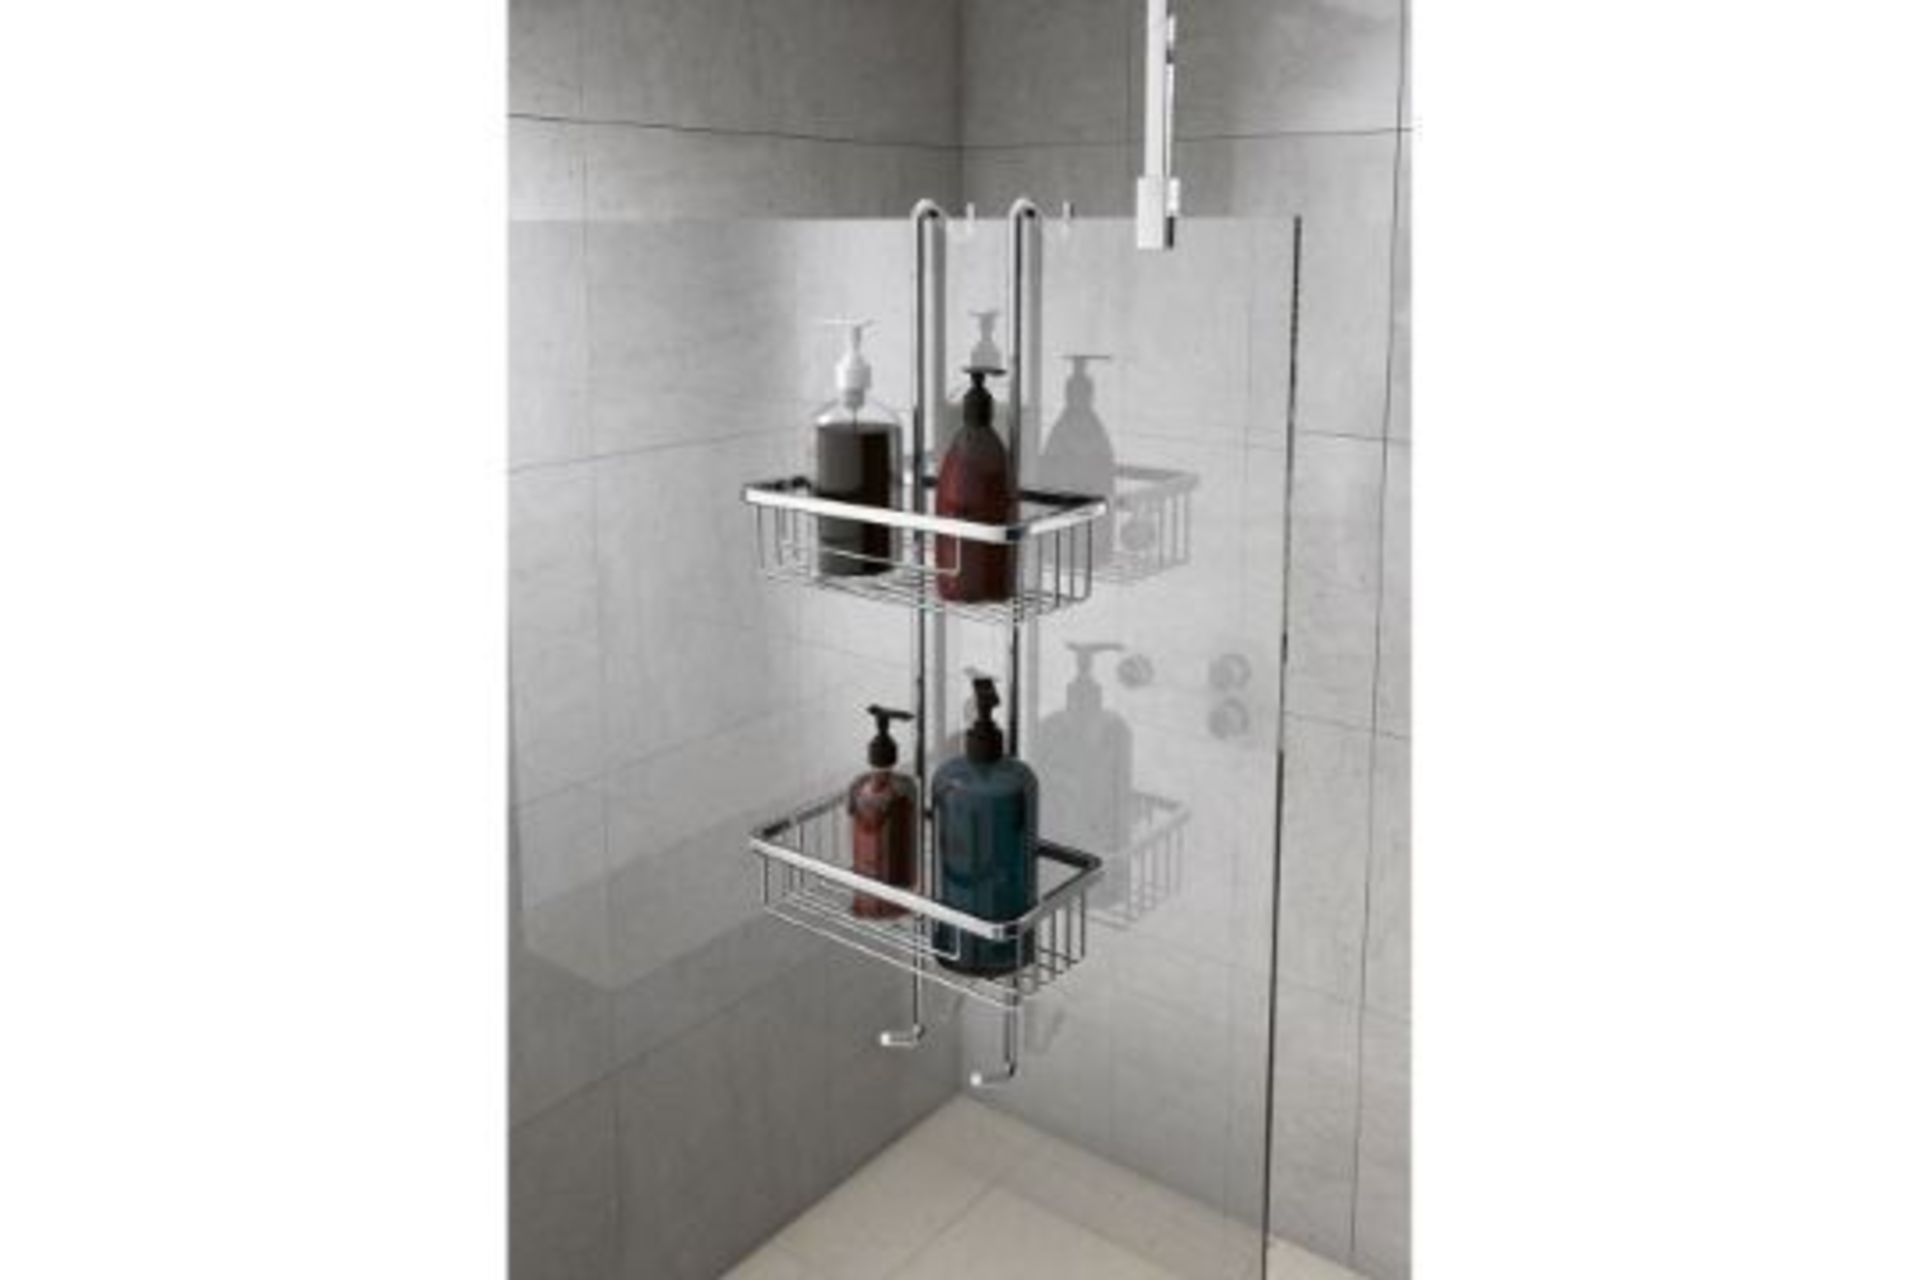 BRAND NEW CHROME DOUBLE WIRE RECTANGULAR SHOWER TIDY RRP £249 PW